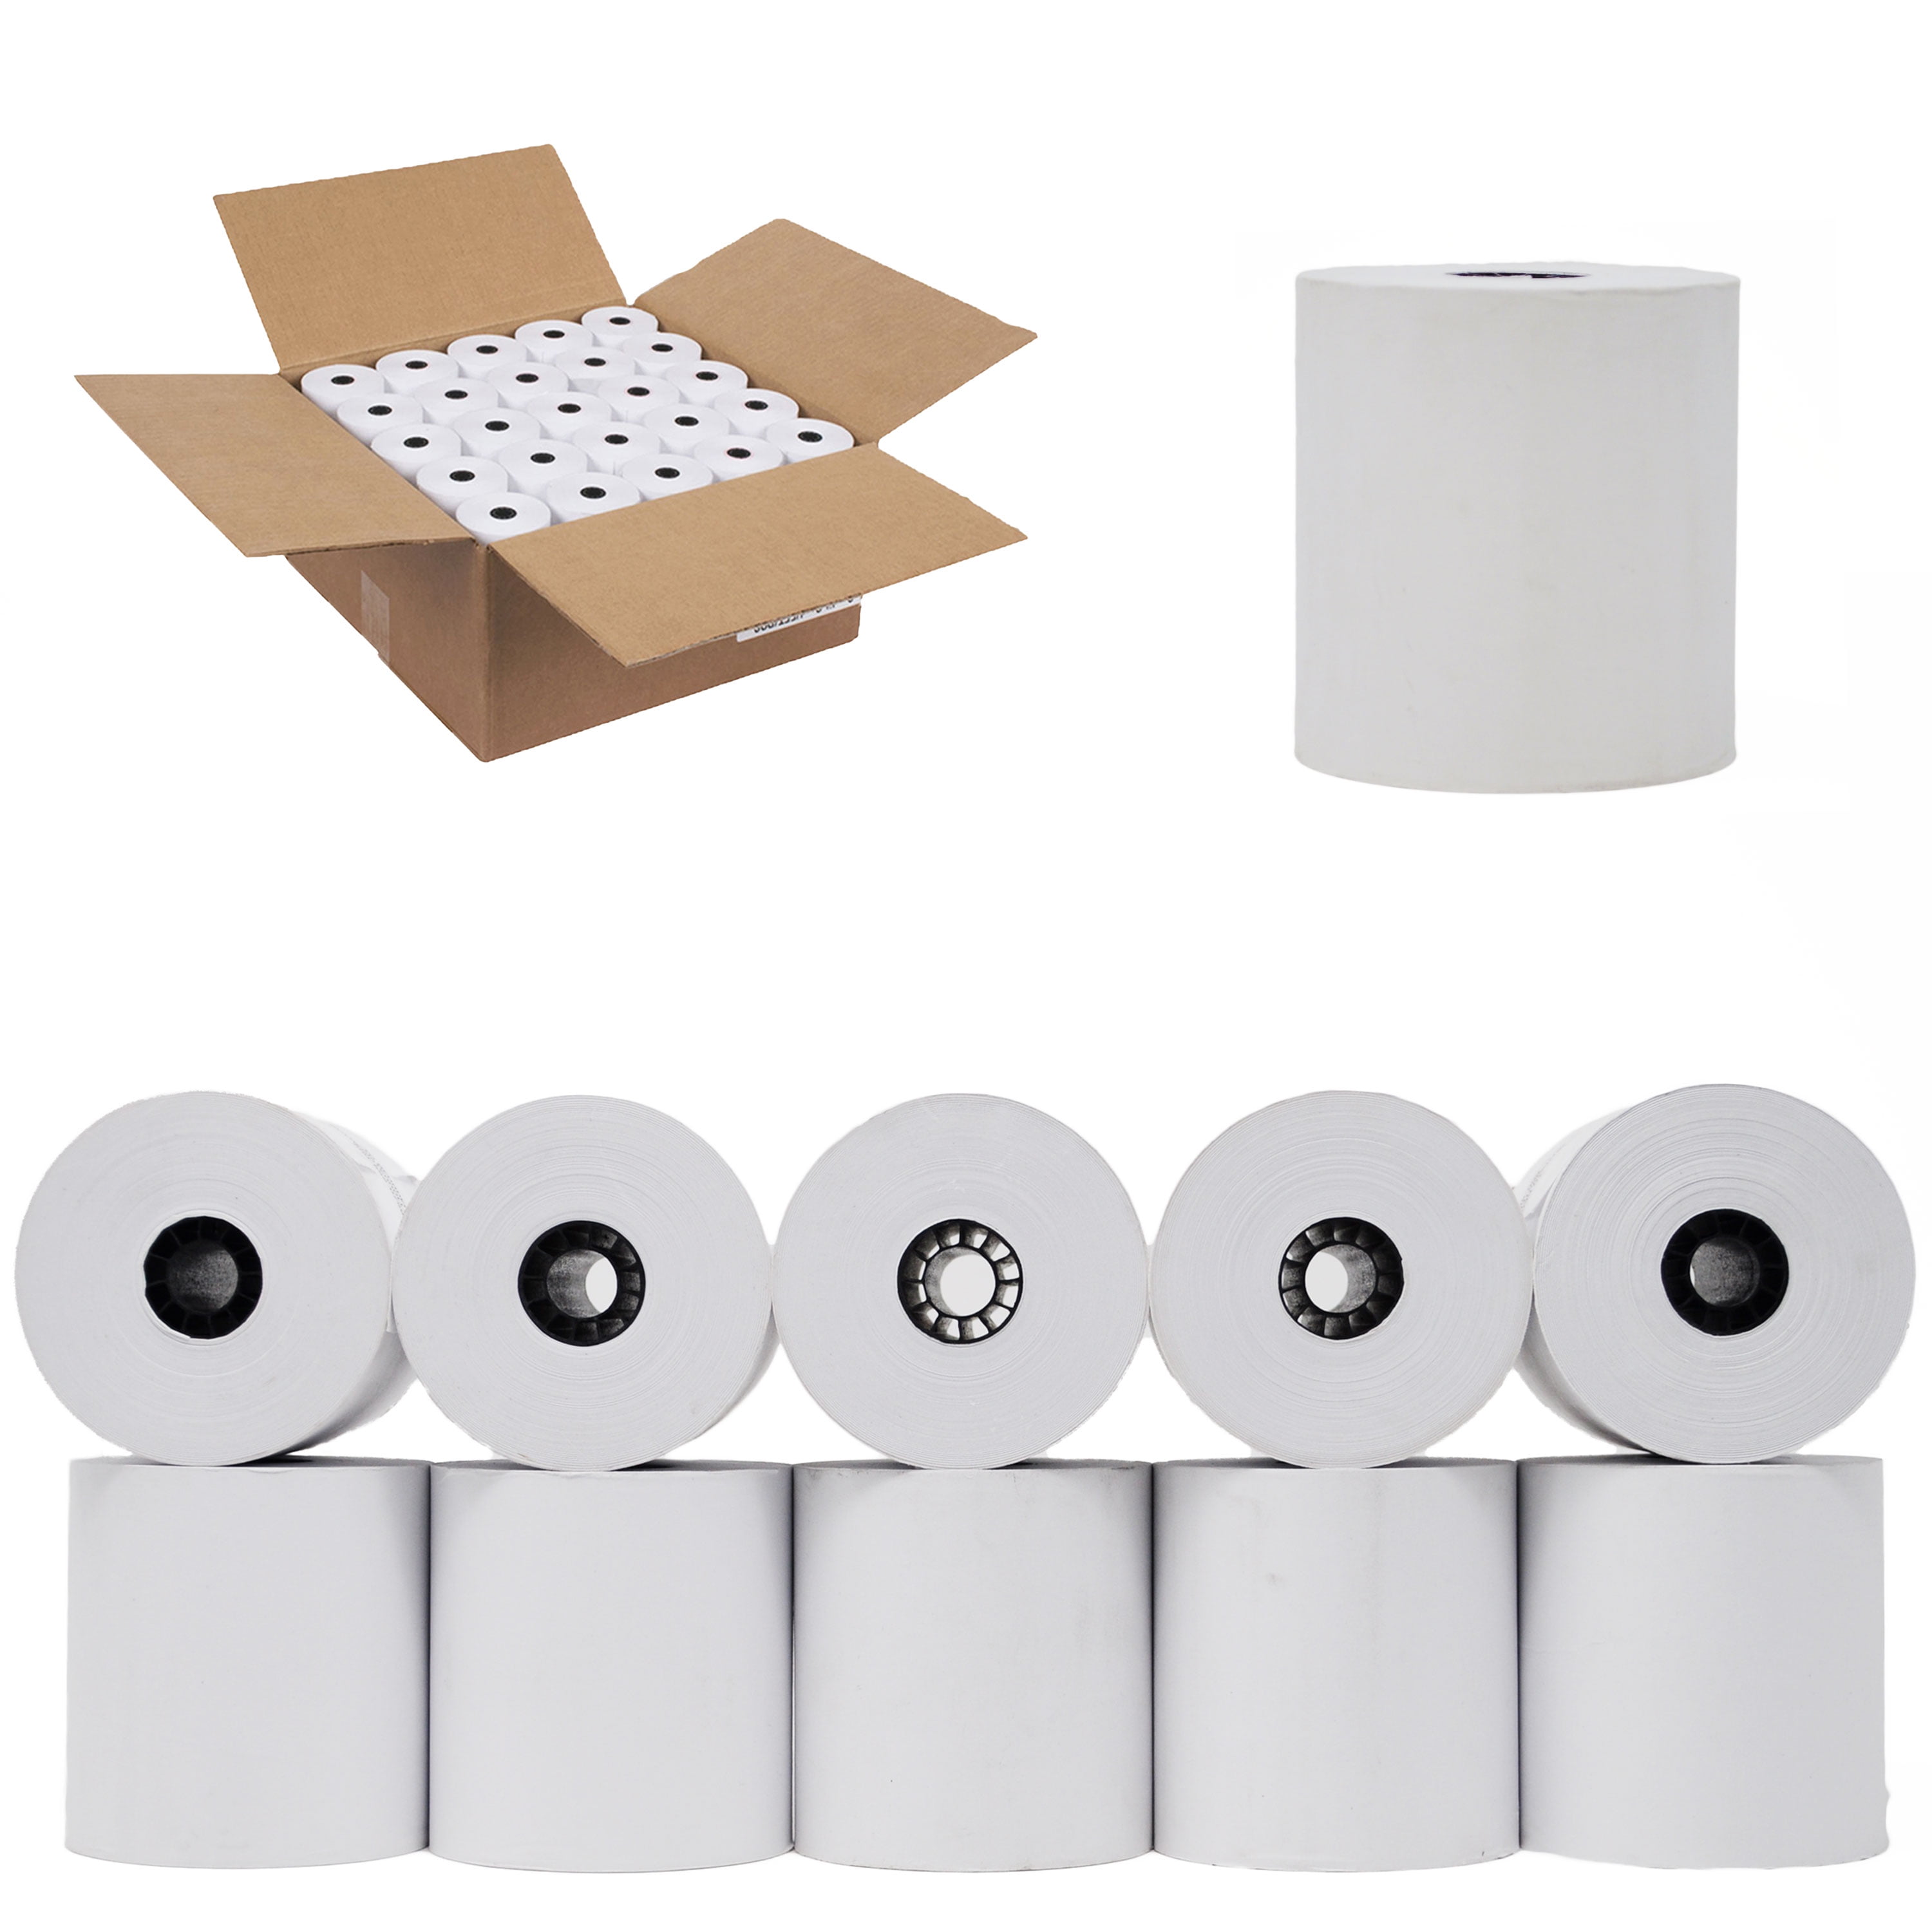 3"x90' Alliance 2-Ply Carbonless Receipt Rolls White/Canary 50 Rolls 